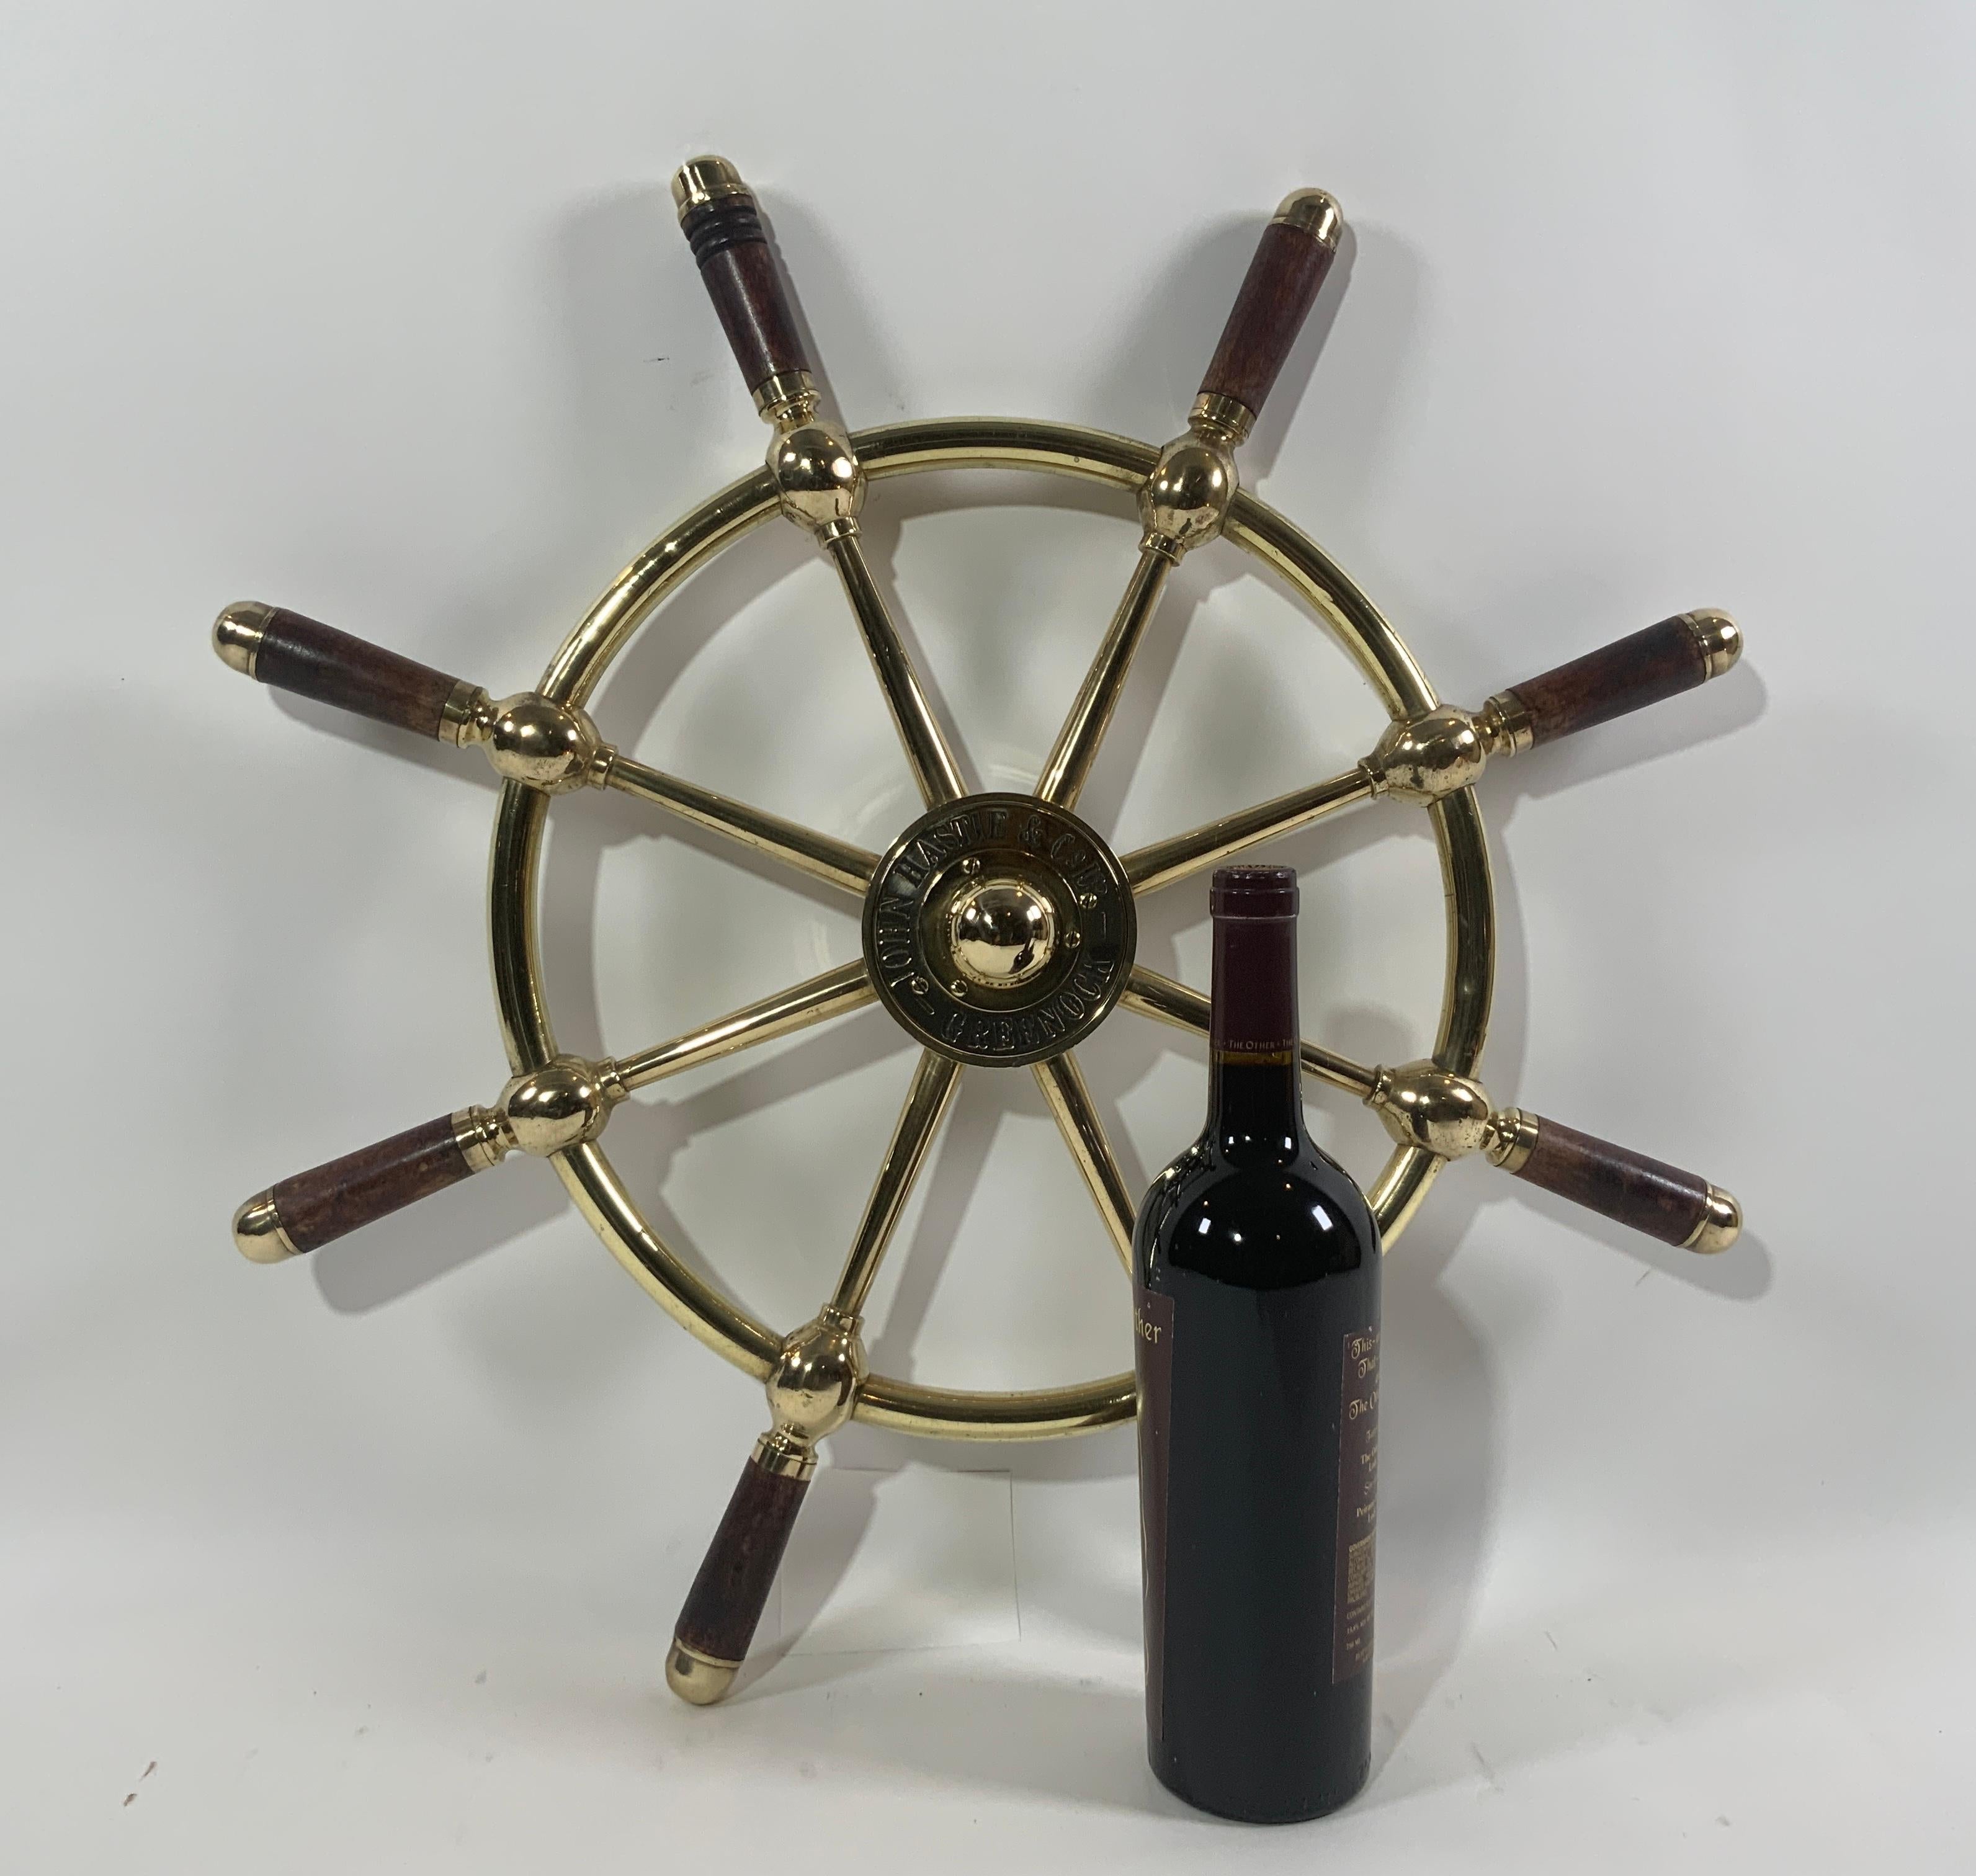 Very nice antique solid brass ships wheel that has been highly polished and lacquered. The hub has deeply engraved makers name 